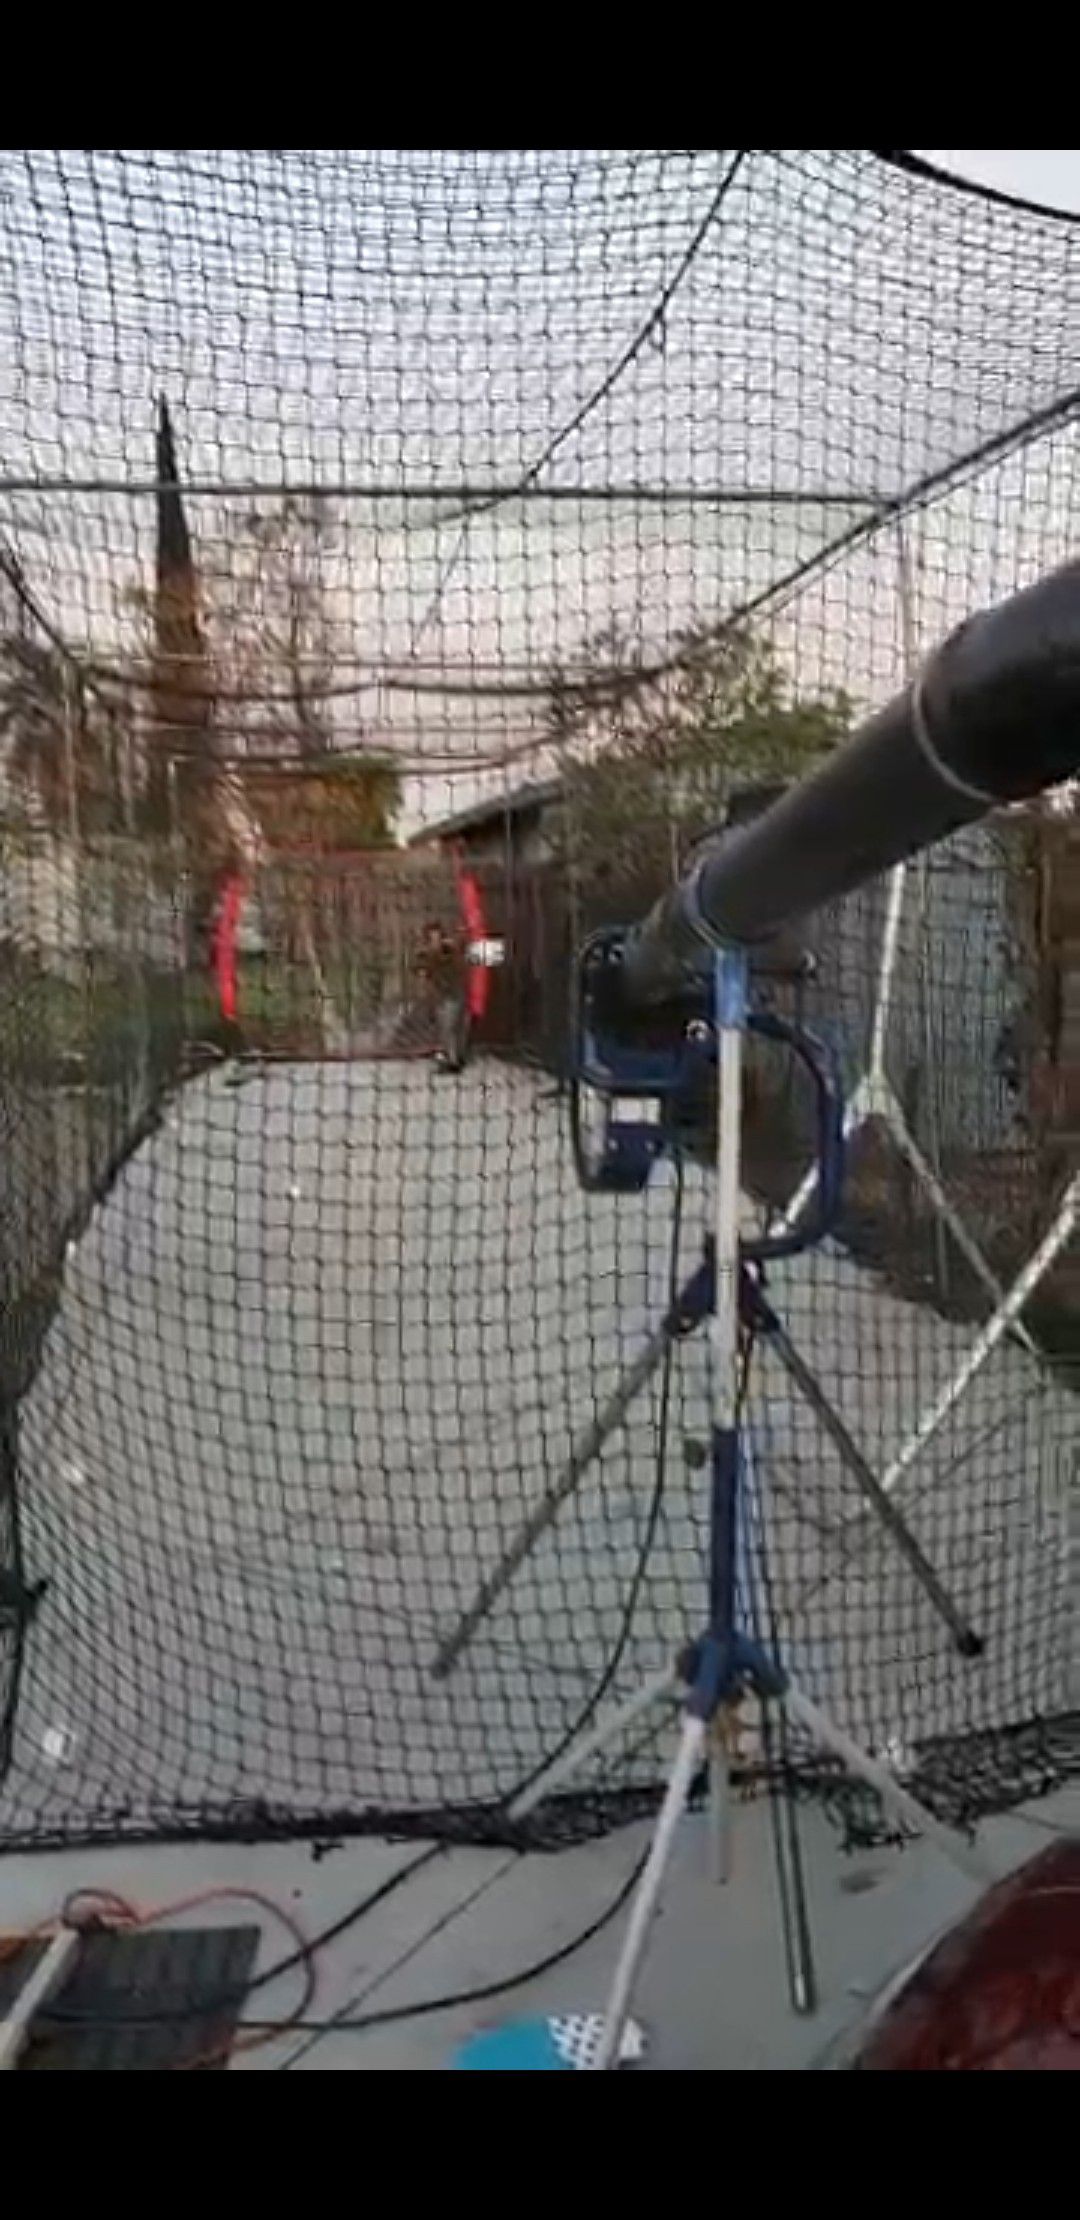 Baseball Batting cage with 2 pitching machines